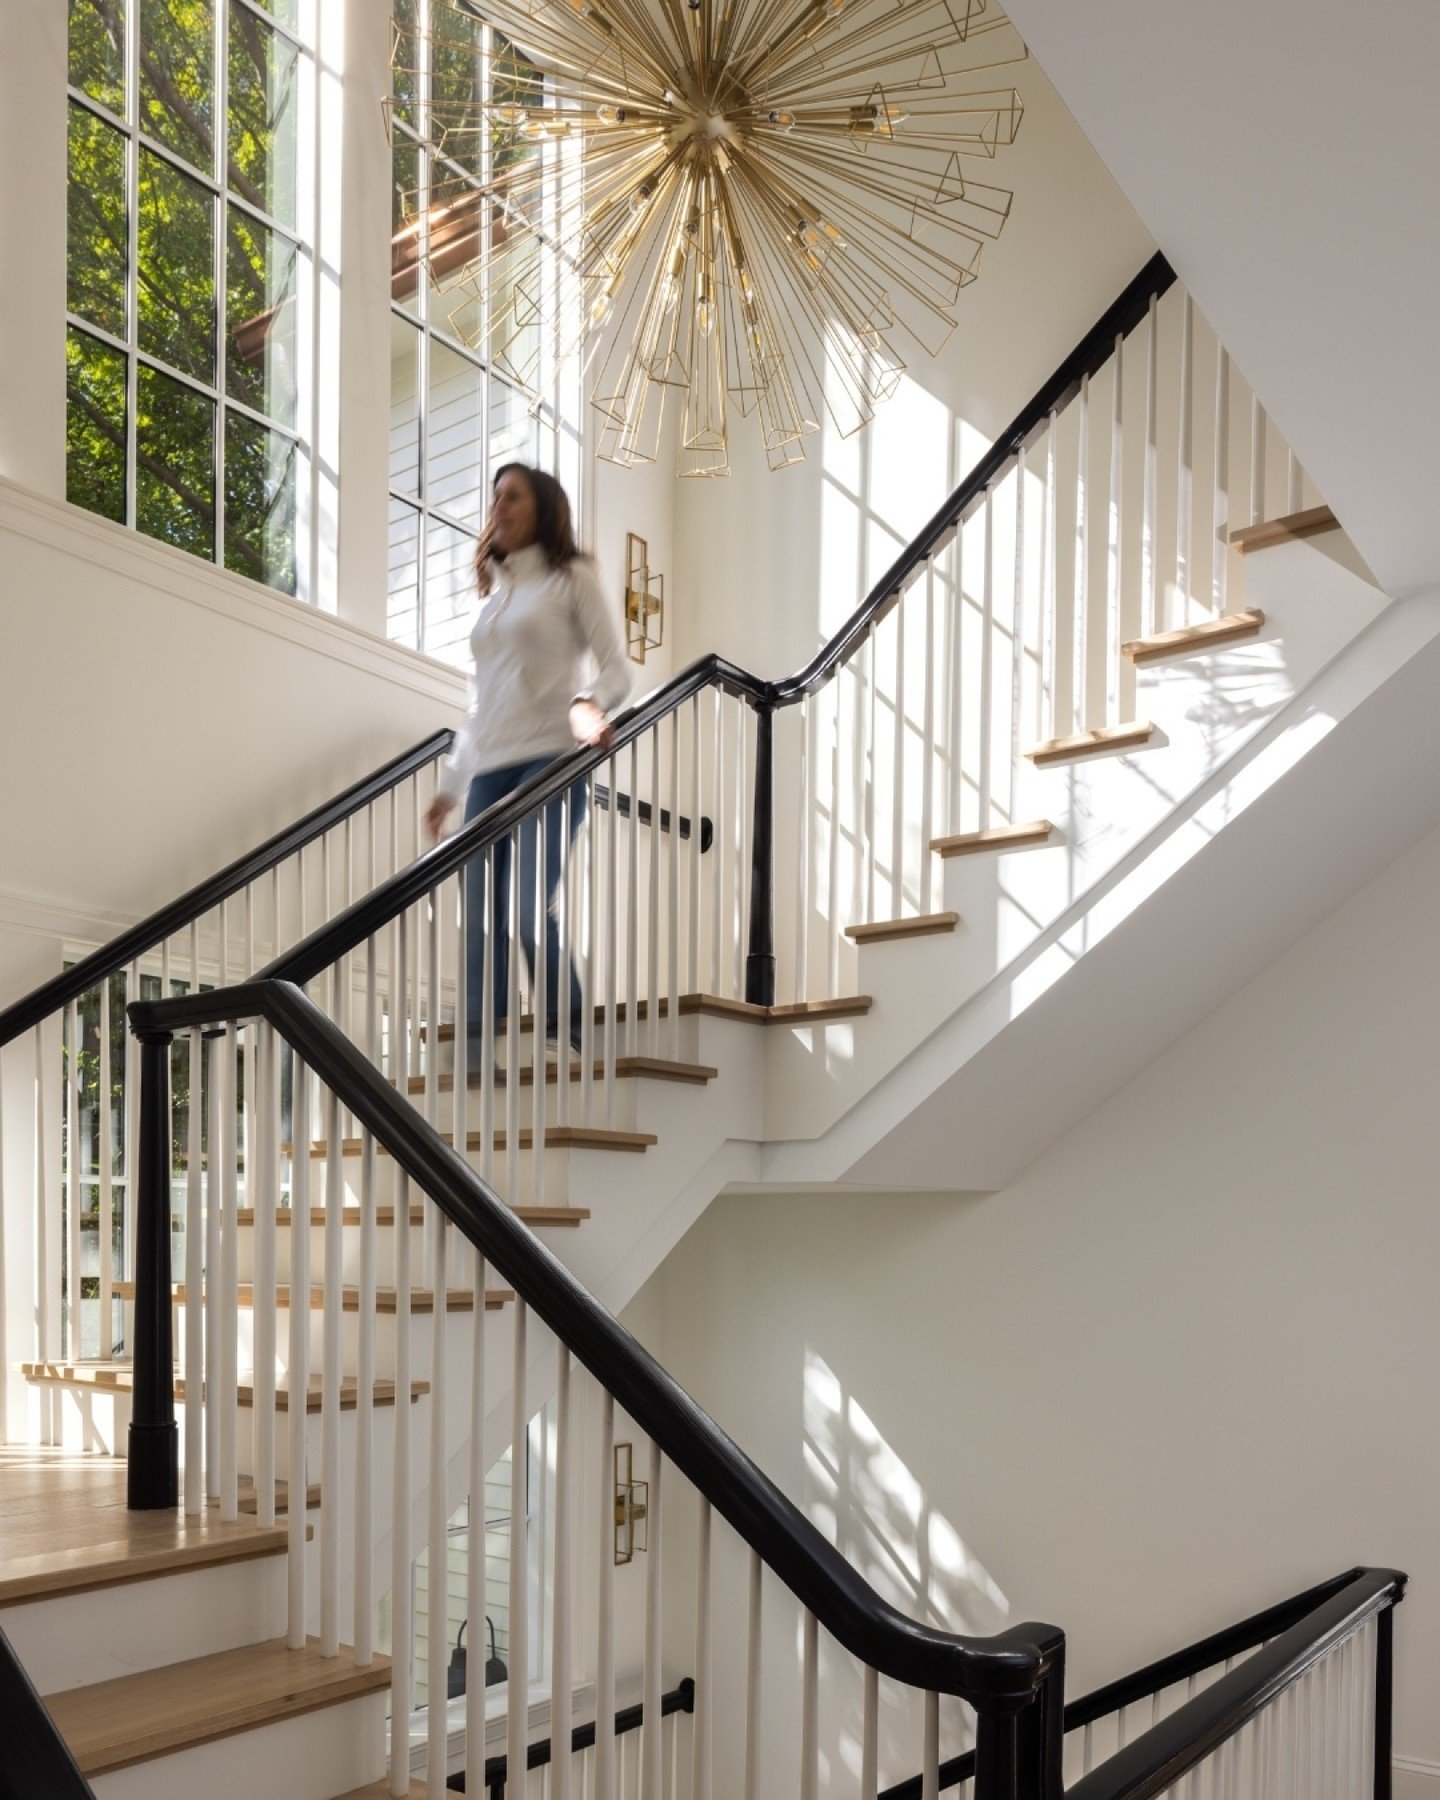 Its Monday...time to get moving!🏃&zwj;♀

Build | @brusharborhomes
Architecture | @mvarchitects
Lighting | @dominionlighting

.
.
.

#stairwell
#stairwelllighting
#stairwelldesign
#customhome
#naturallight
#whcdesignthatrestores